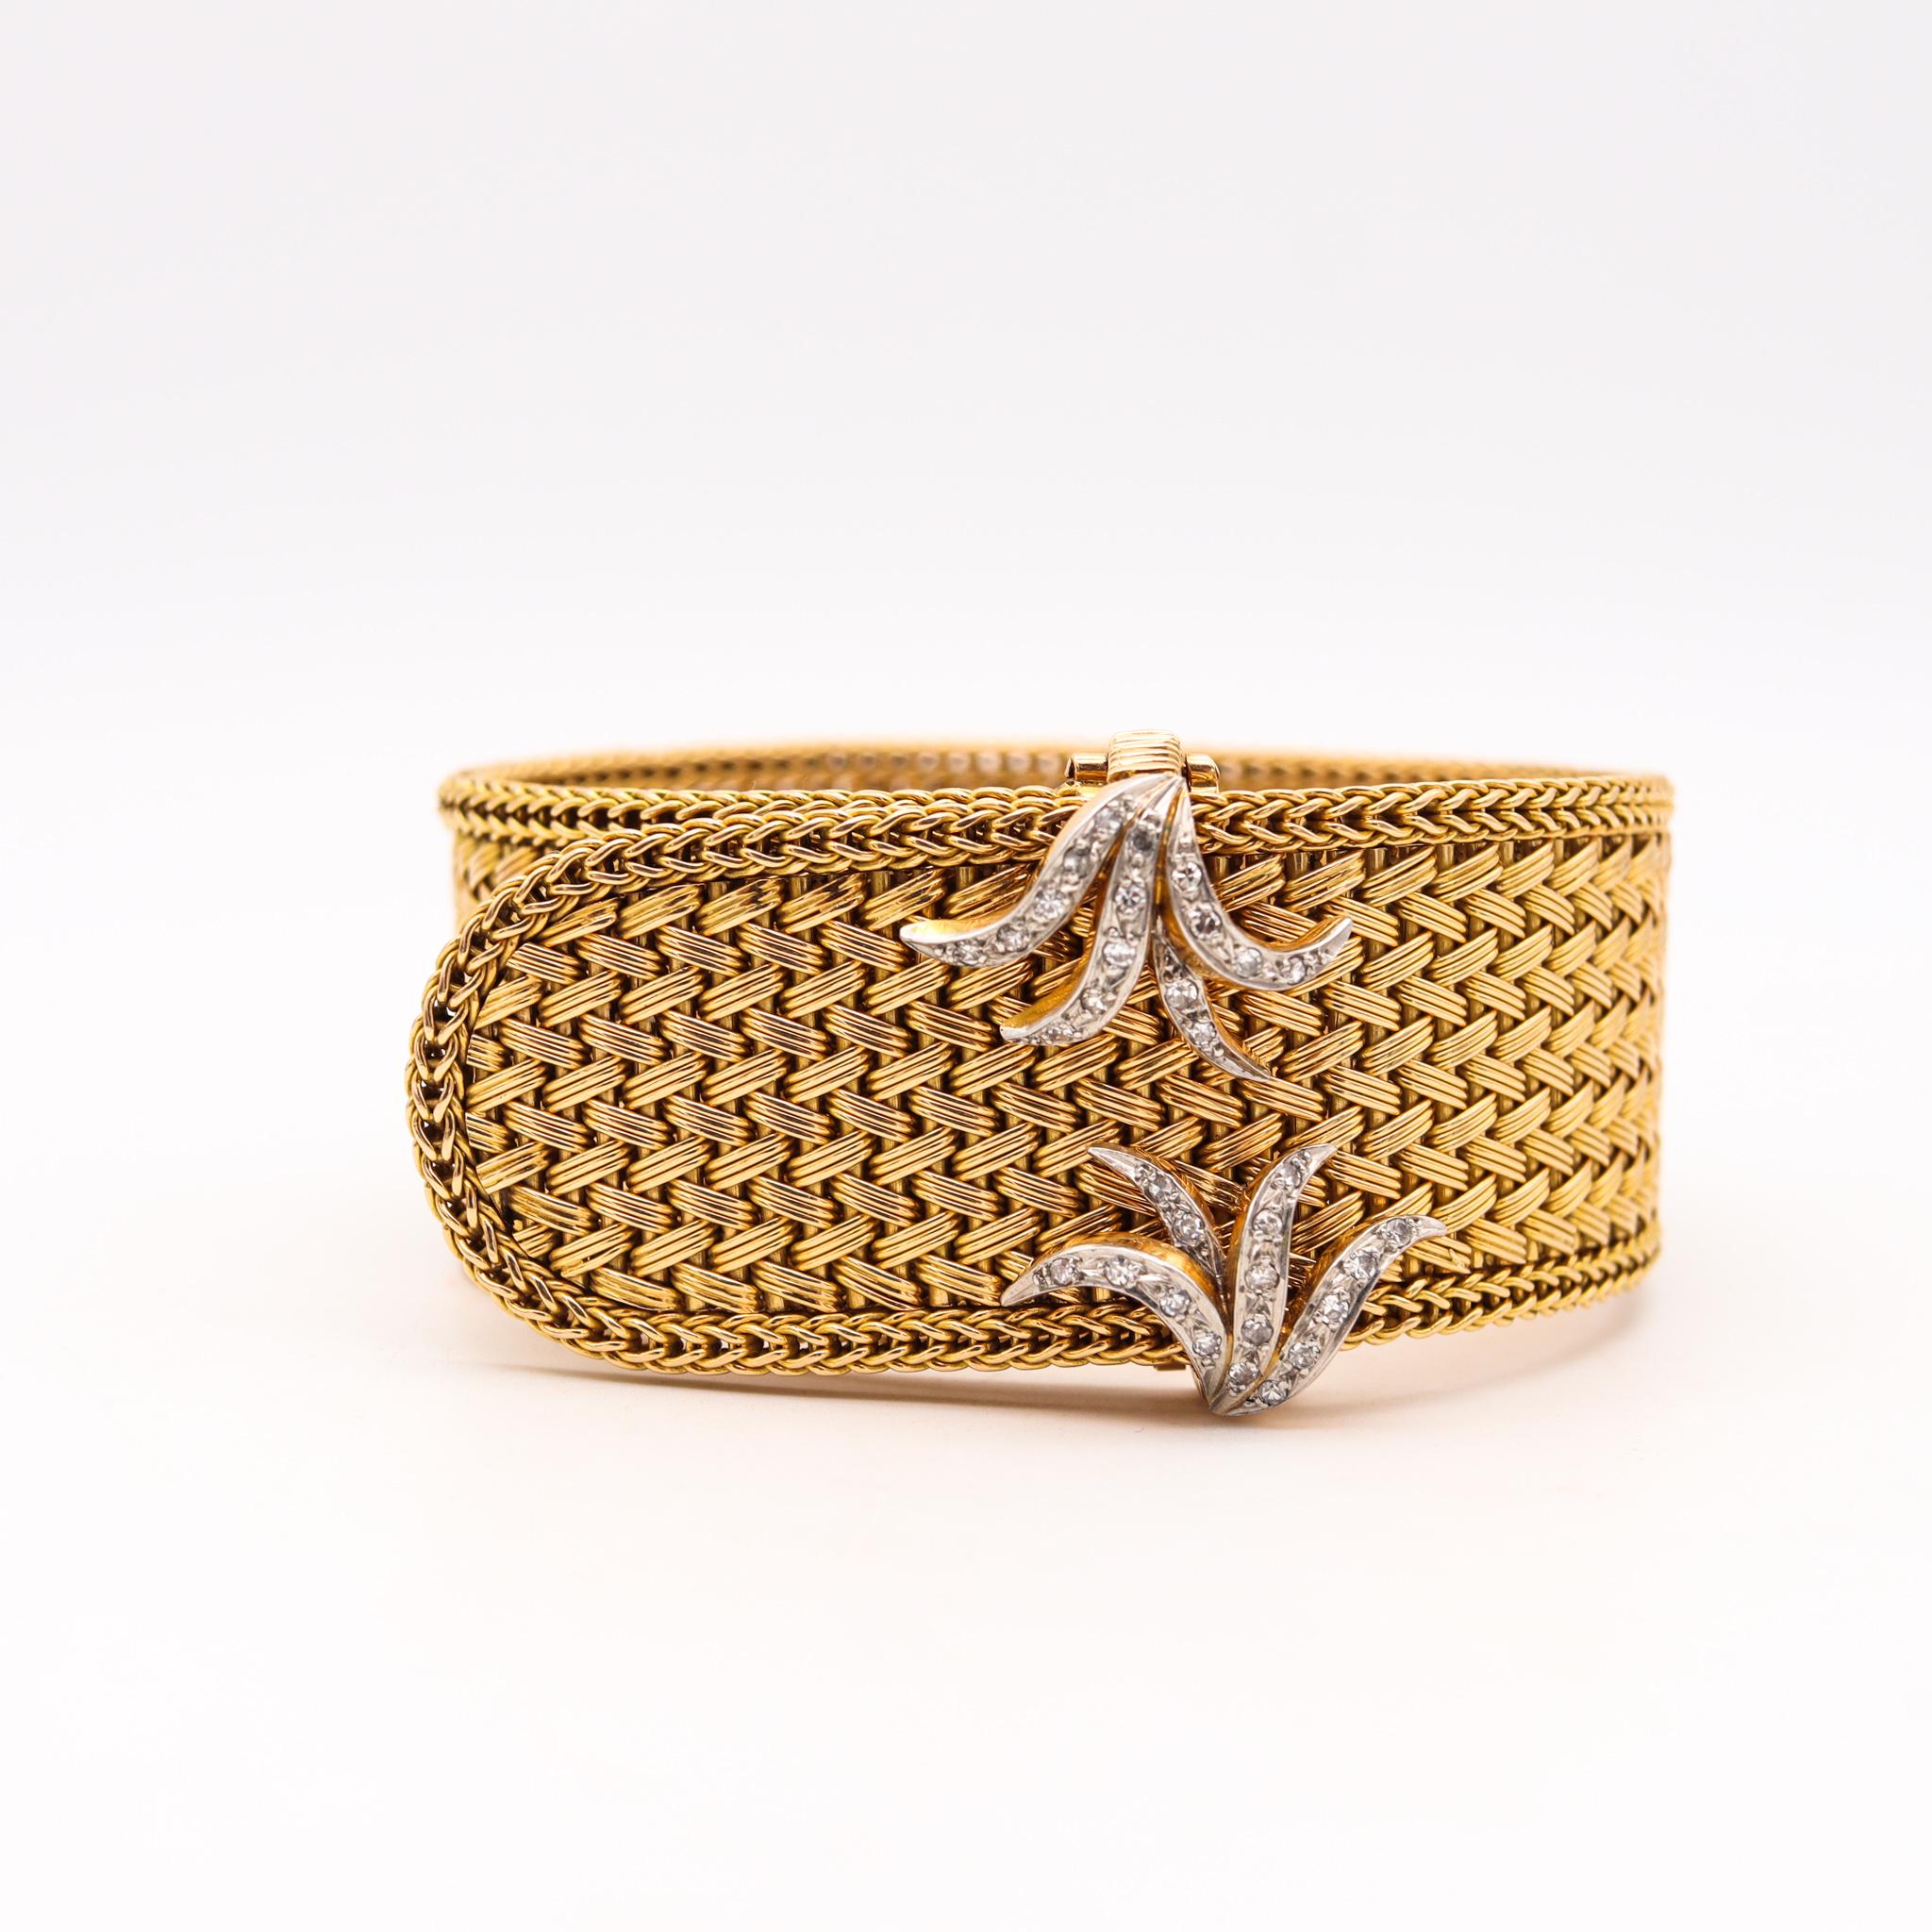 Retro French 1950 Mid-Century Mesh Buckle Bracelet in 18Kt Gold with Diamonds Accents